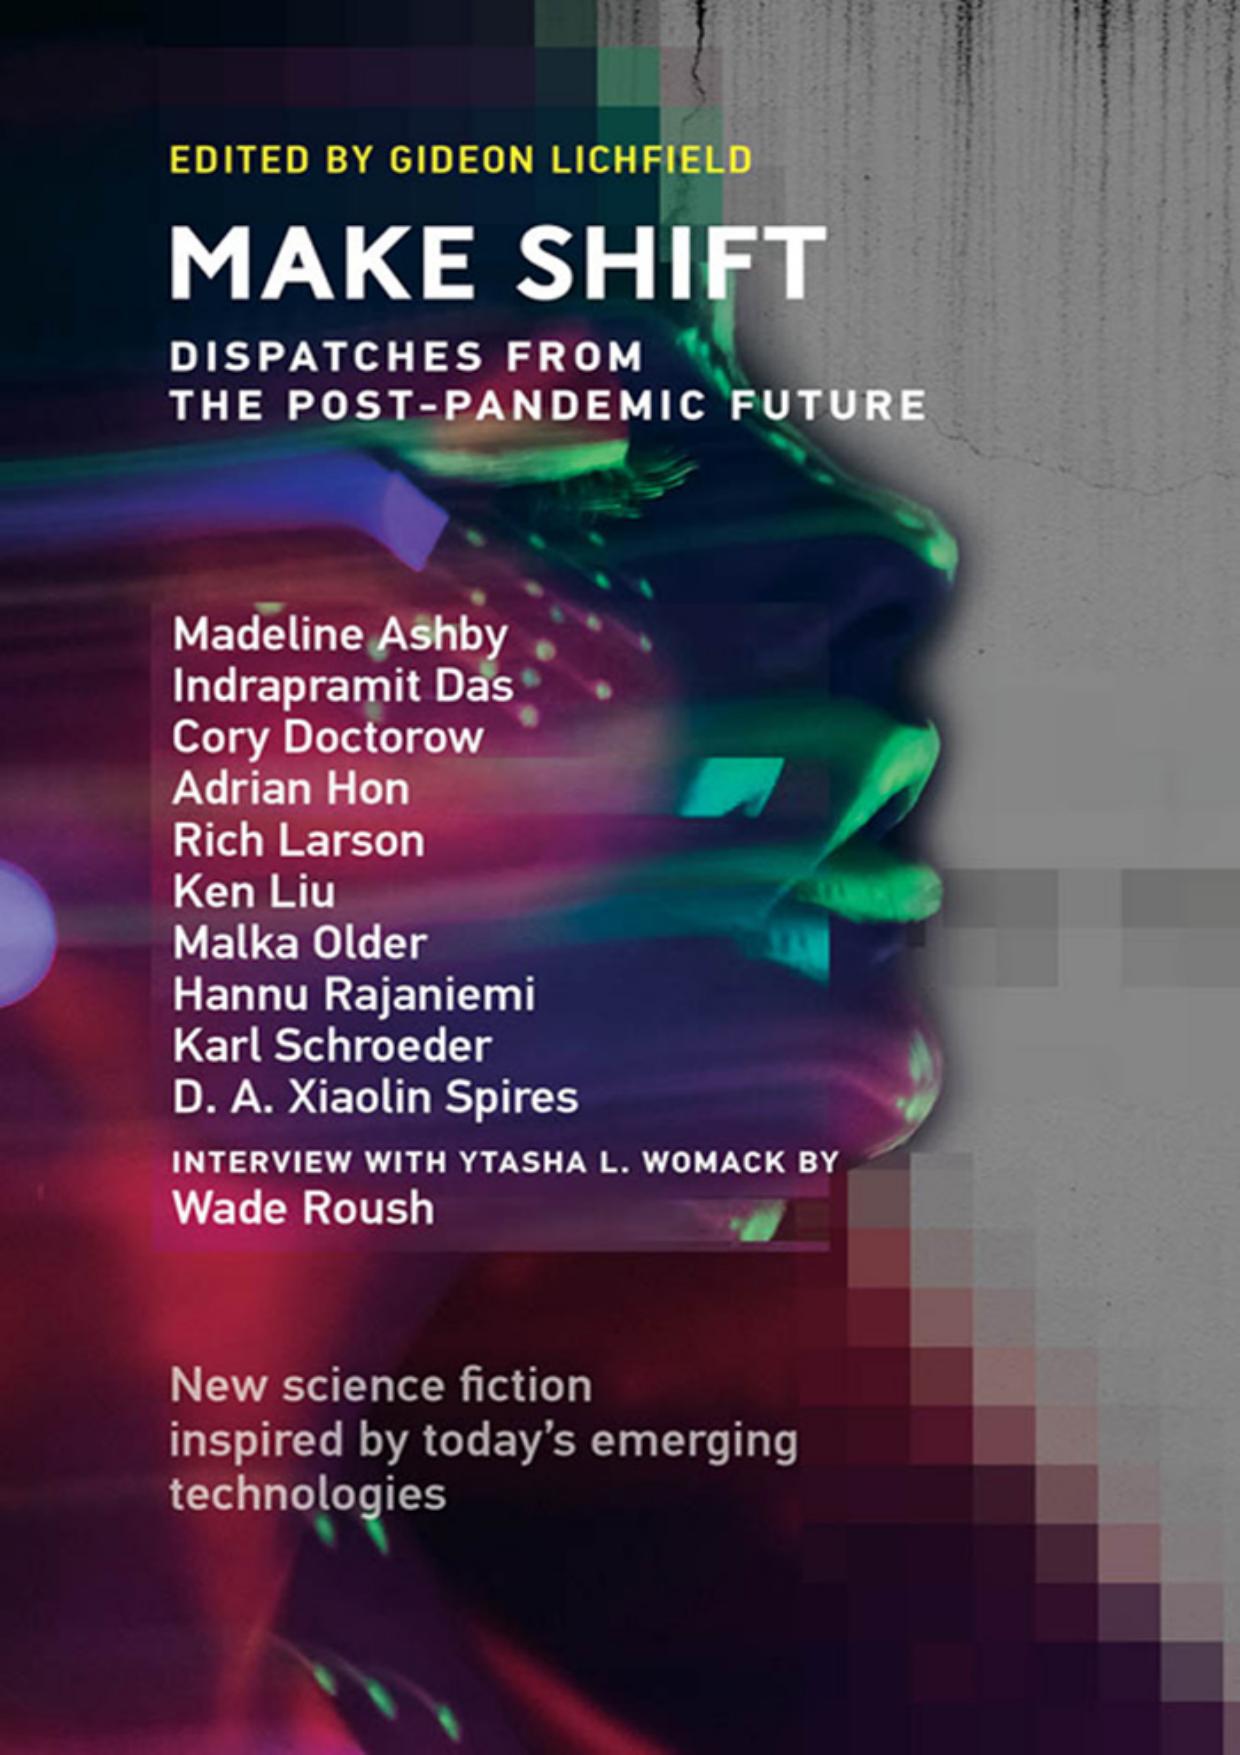 (eBook PDF)Make Shift: Dispatches from the Post-Pandemic Future by Gideon Lichfield